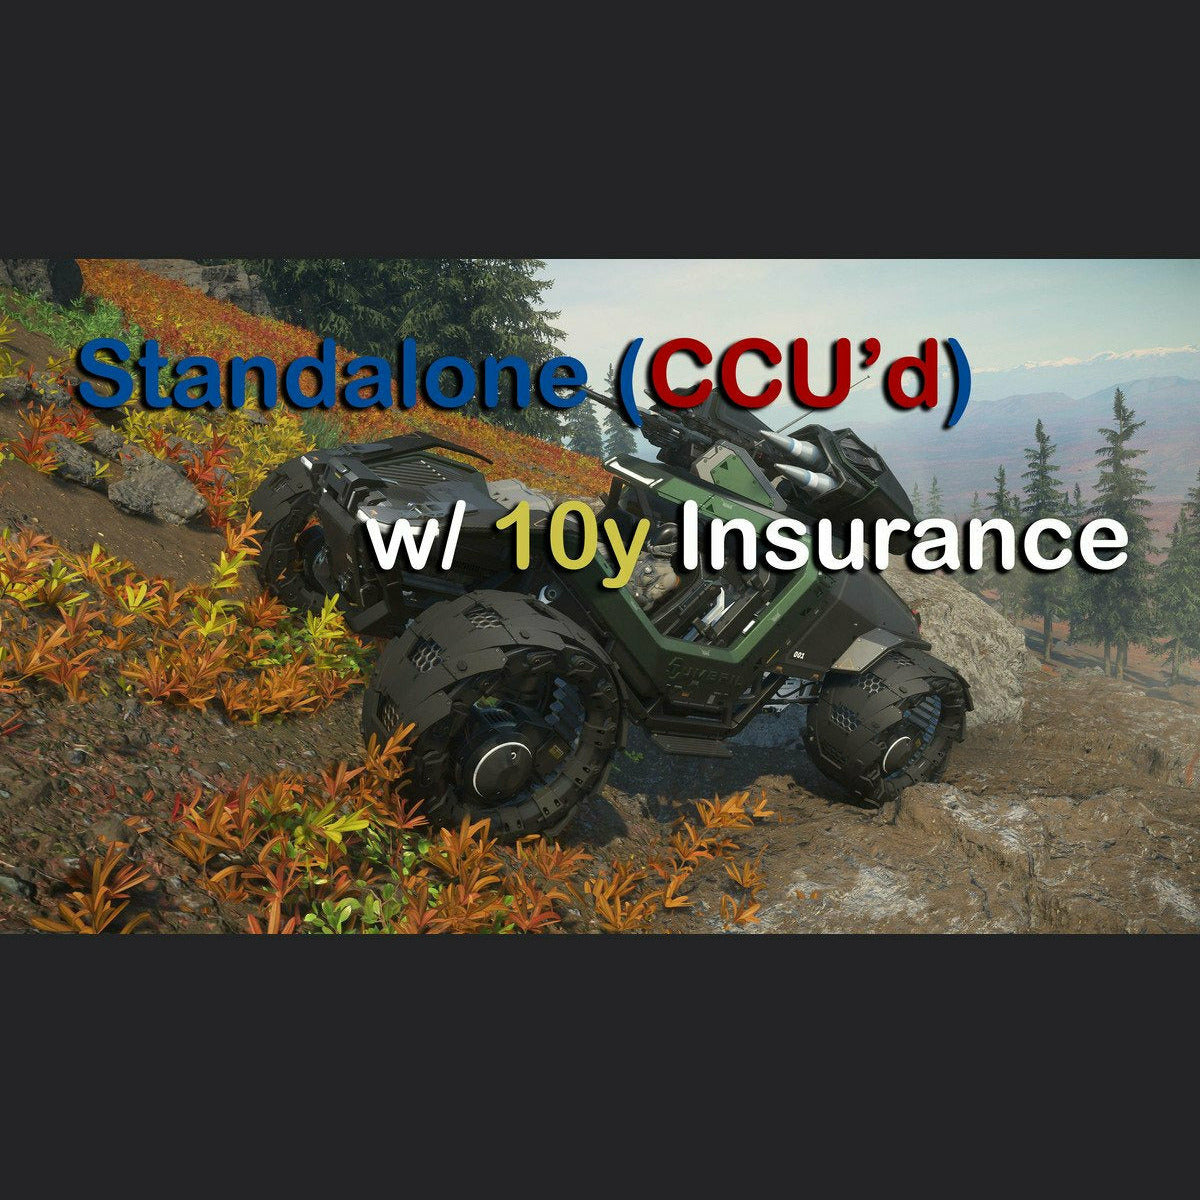 Cyclone MT - 10y Insurance | Space Foundry Marketplace.